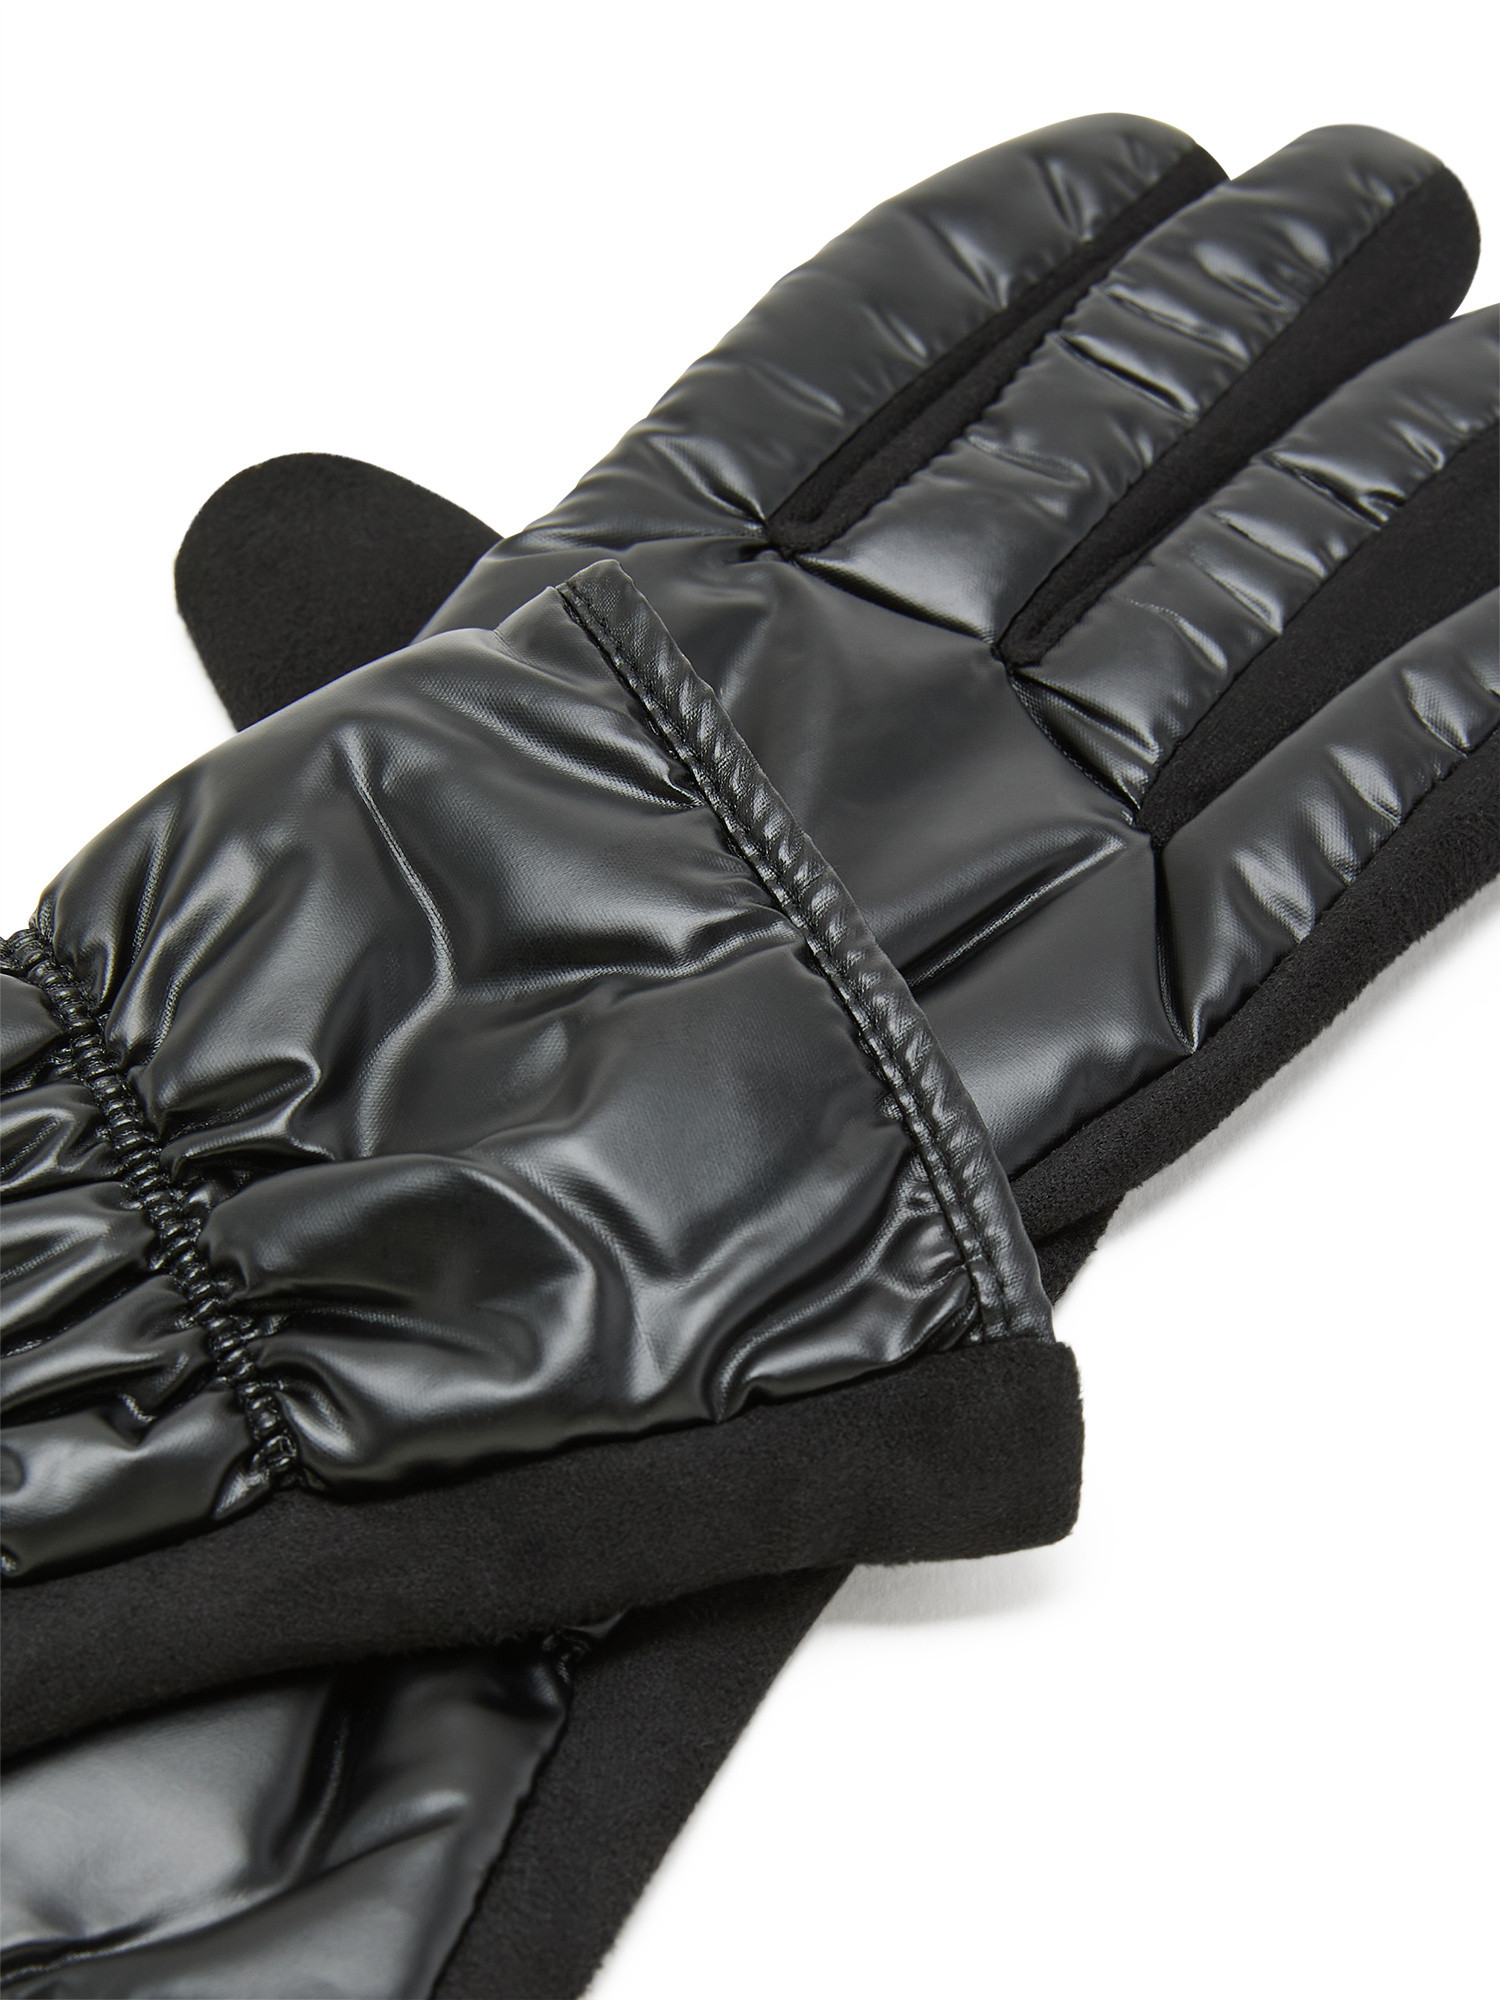 Koan - Two-fabric gloves, Black, large image number 1